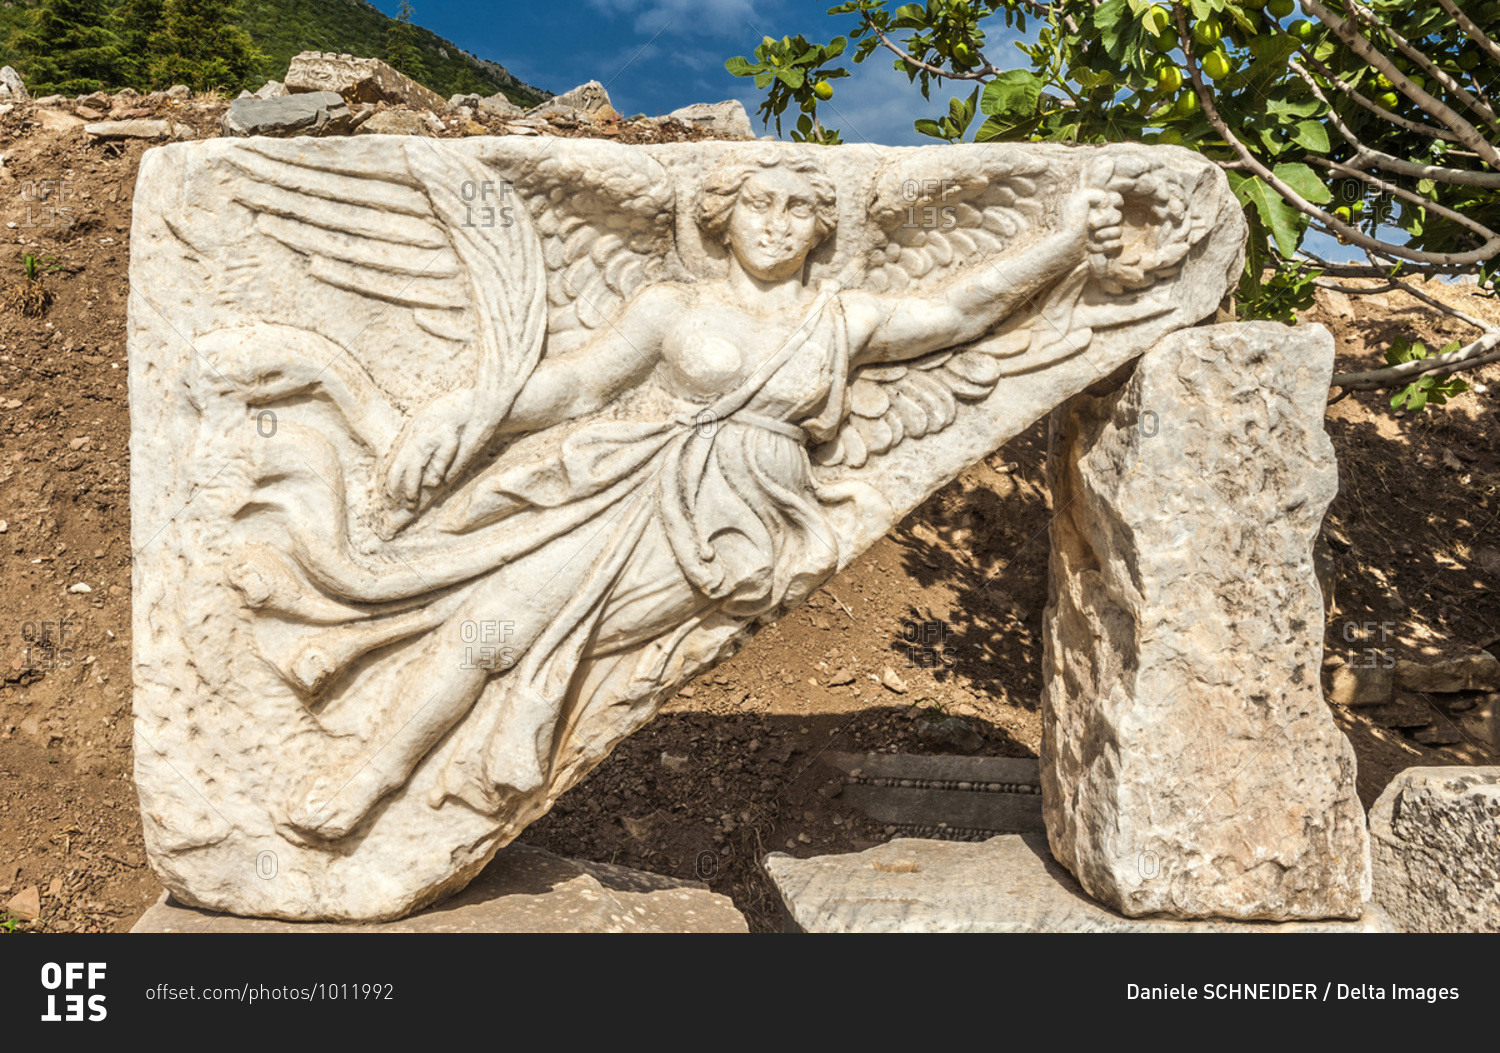 Turkey, province of Izmir, ancient Greek city of Ephesus (Roman port, role in the spread of Christianity with the councils of 431 and 449), bas-relief of the temple of Domitian (1st century) (UNESCO World Heritage)